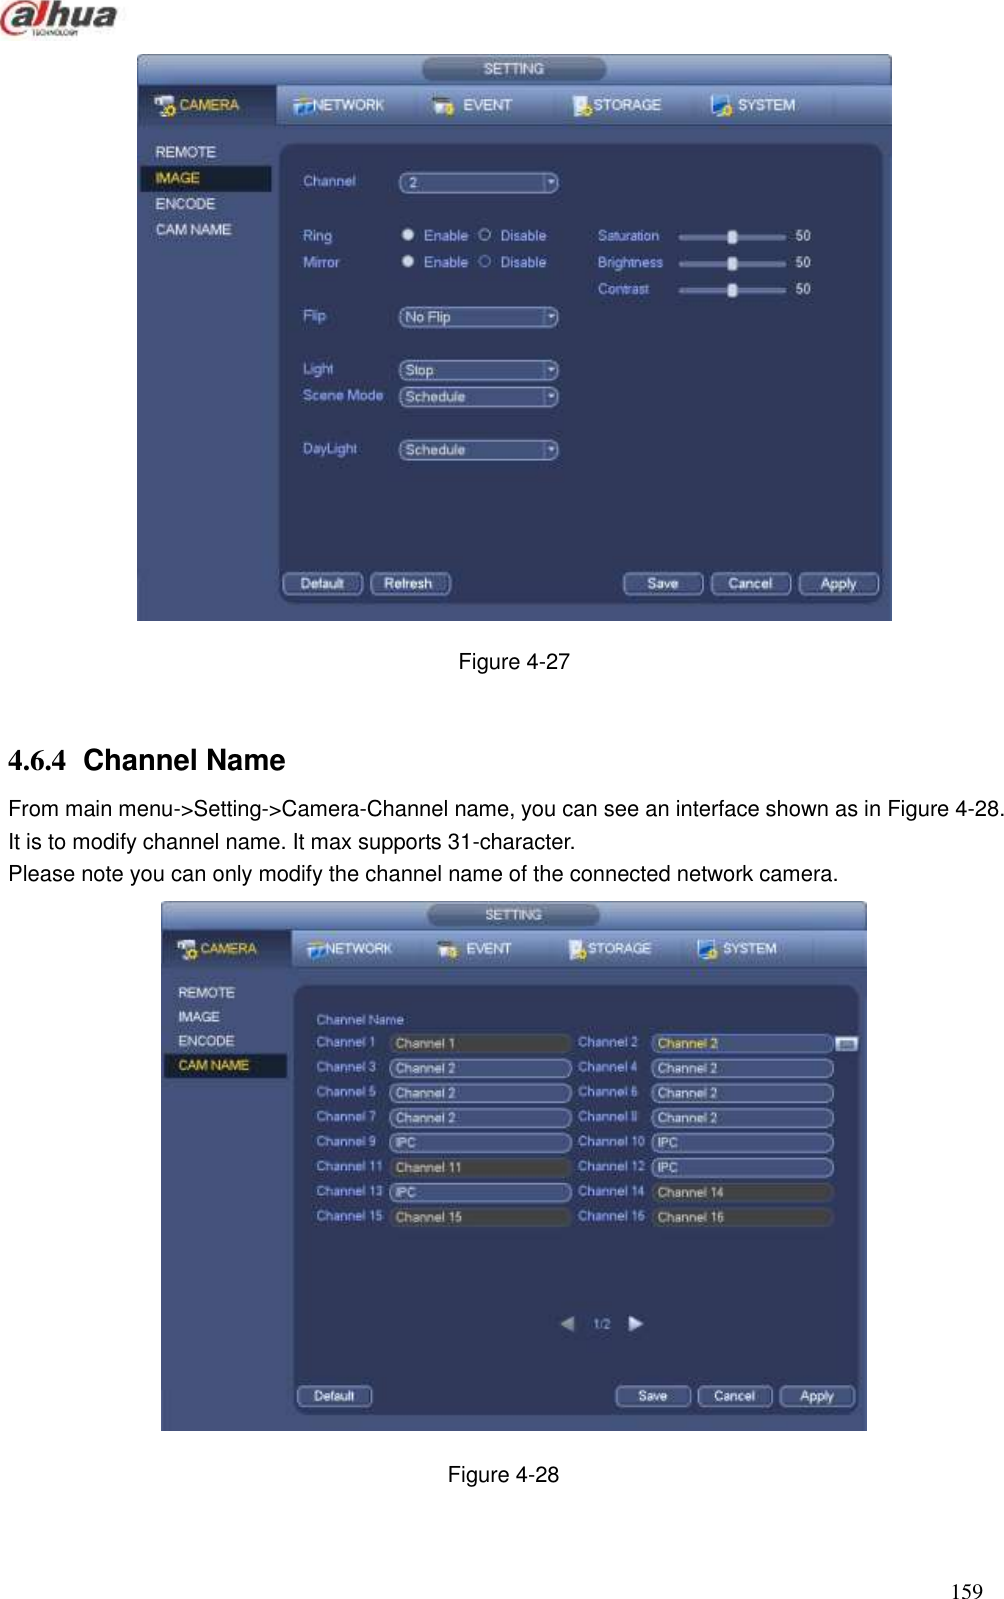  159   Figure 4-27  4.6.4  Channel Name From main menu-&gt;Setting-&gt;Camera-Channel name, you can see an interface shown as in Figure 4-28. It is to modify channel name. It max supports 31-character.   Please note you can only modify the channel name of the connected network camera.    Figure 4-28  